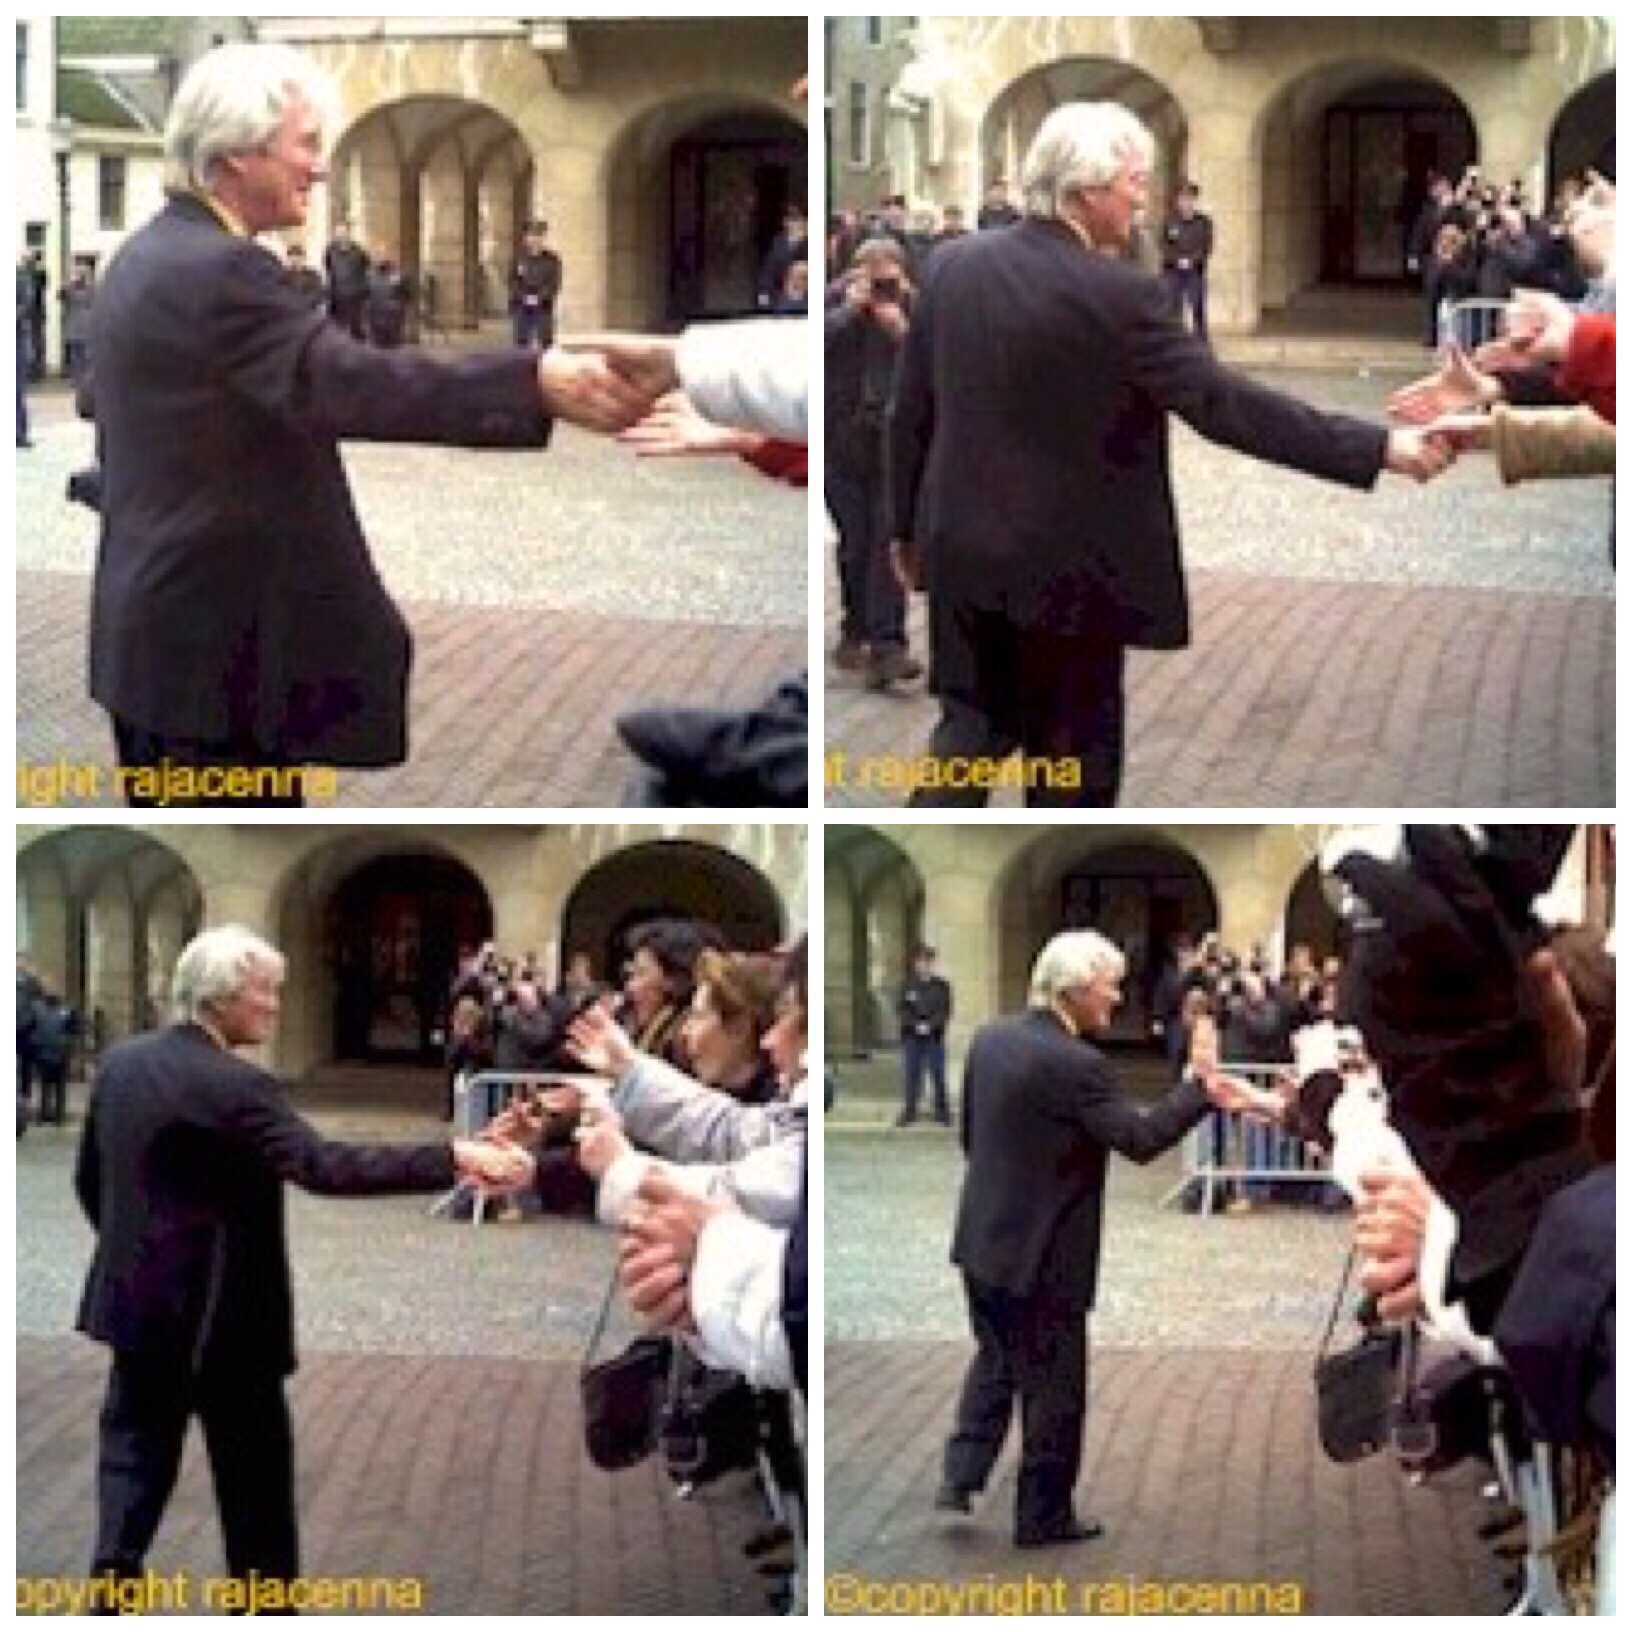 Richard Gere and fans